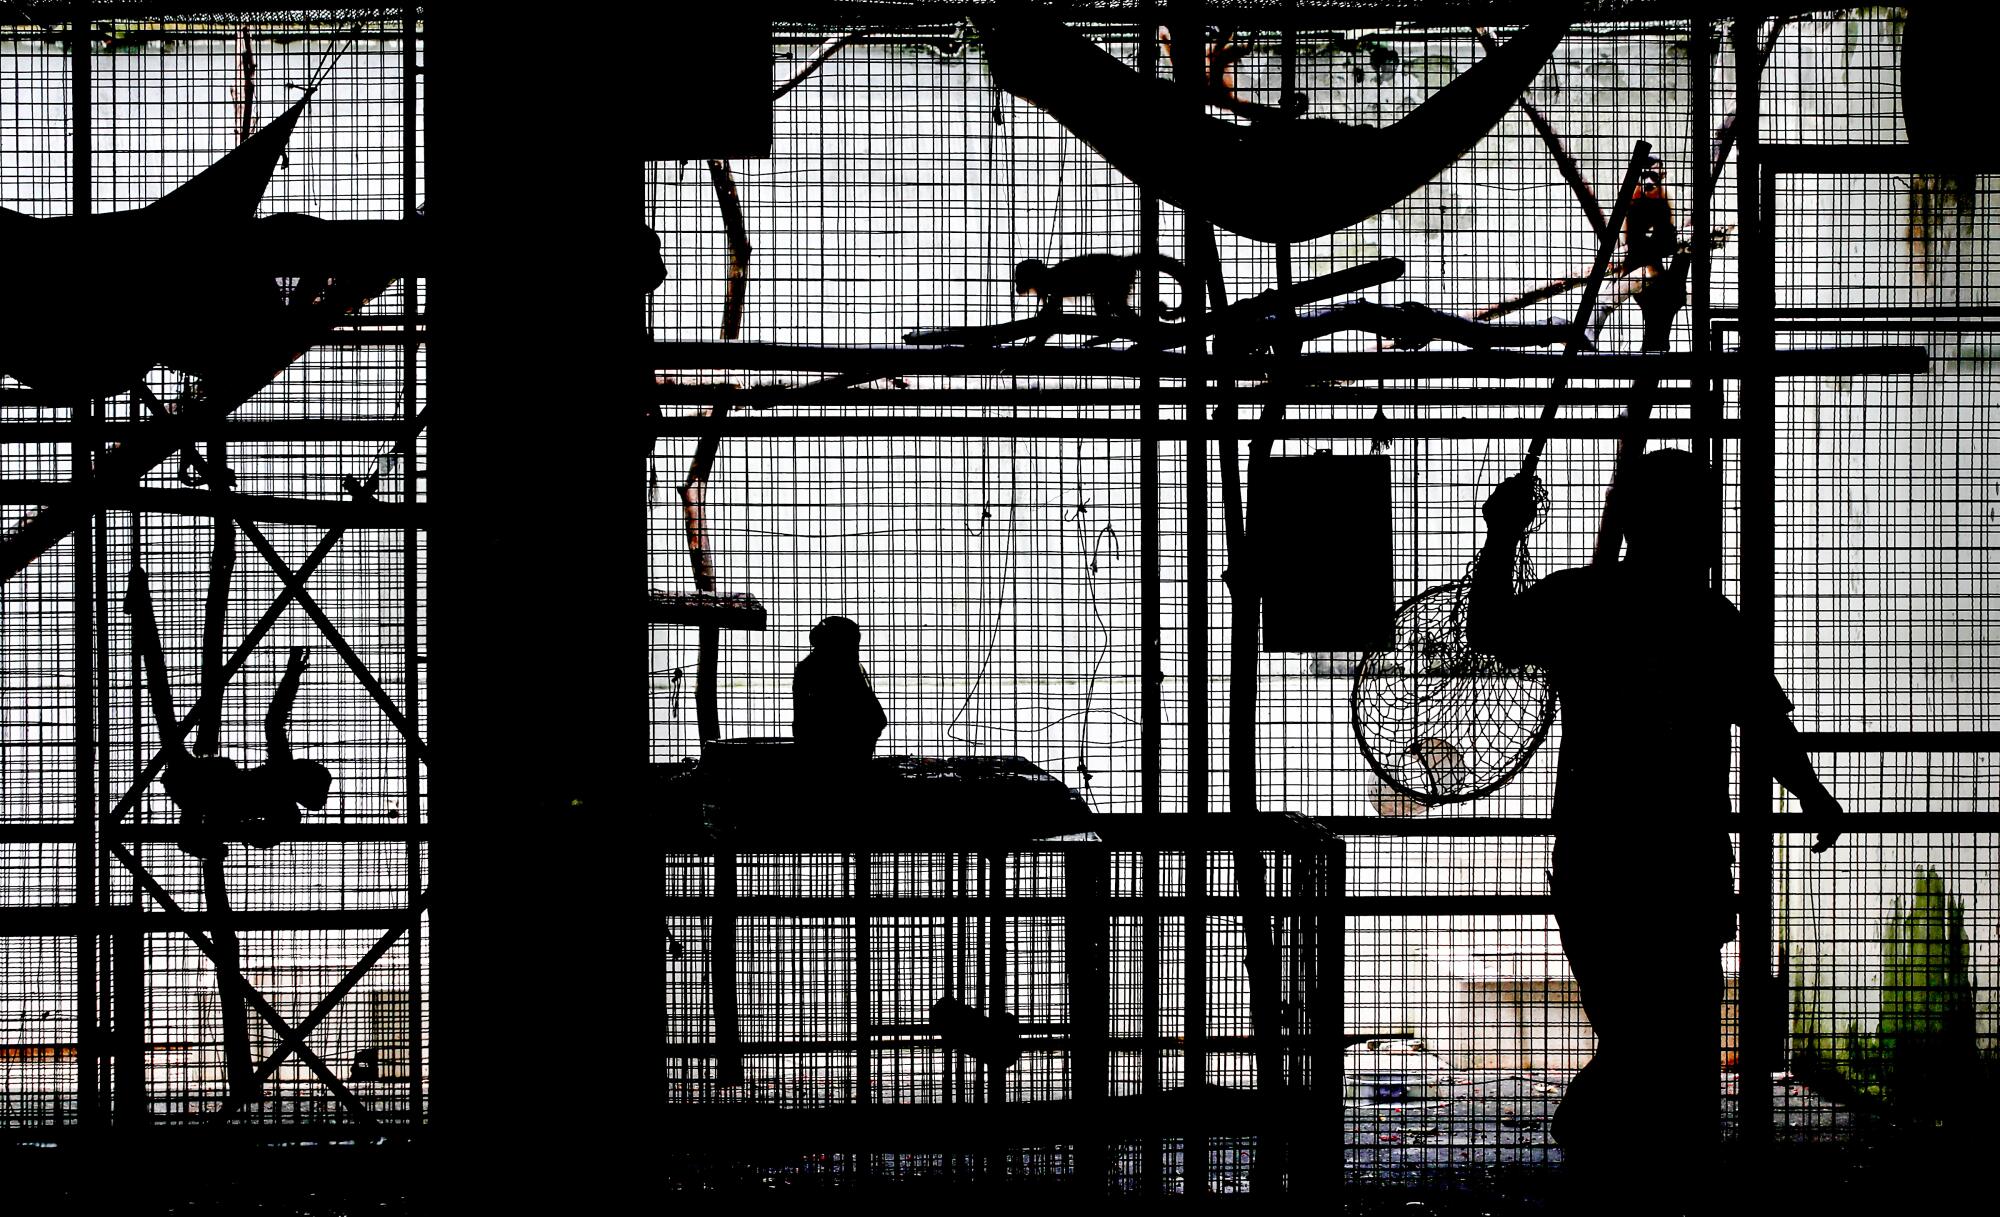 A worker tends to caged primates 